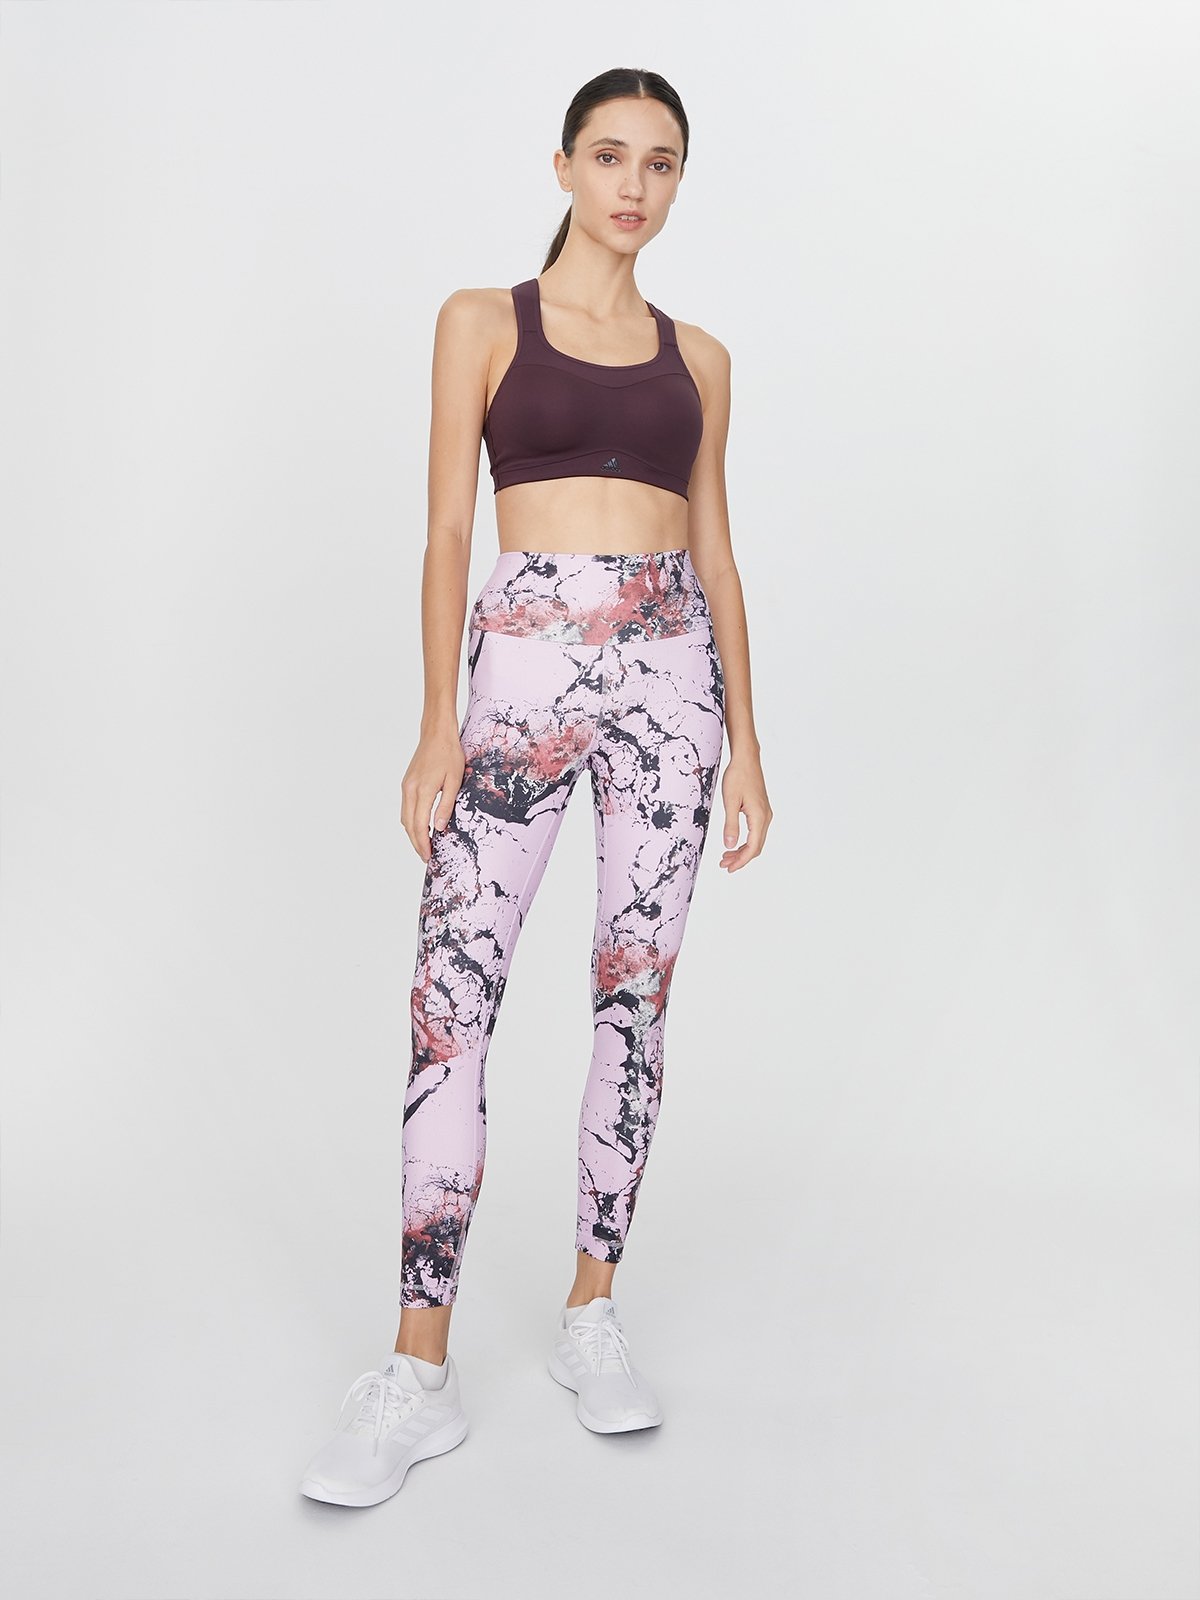 Yoga Essentials Print 7/8 Tights - Bliss Lilac/ Off White - Pomelo